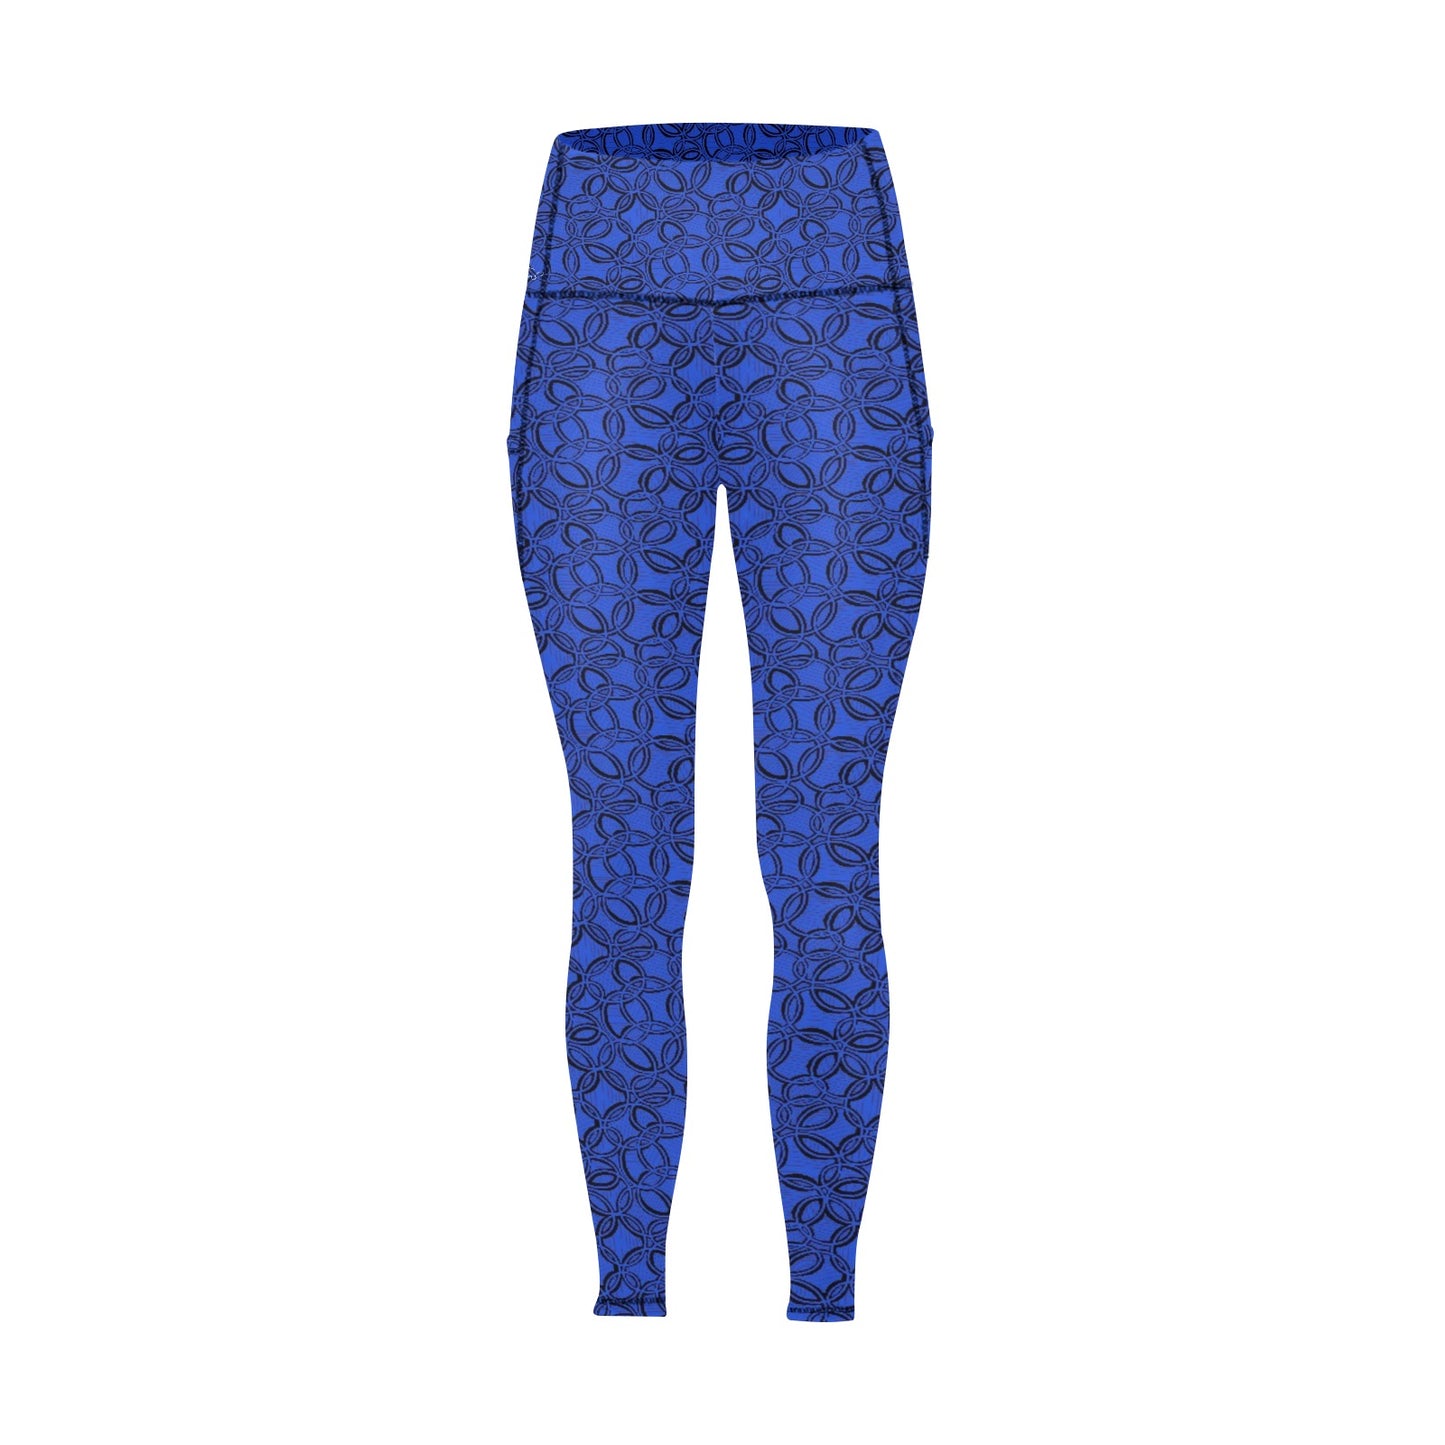 Geometric Blue Leggings with Pockets. Design hand-painted by the Designer Maria Alejandra Echenique